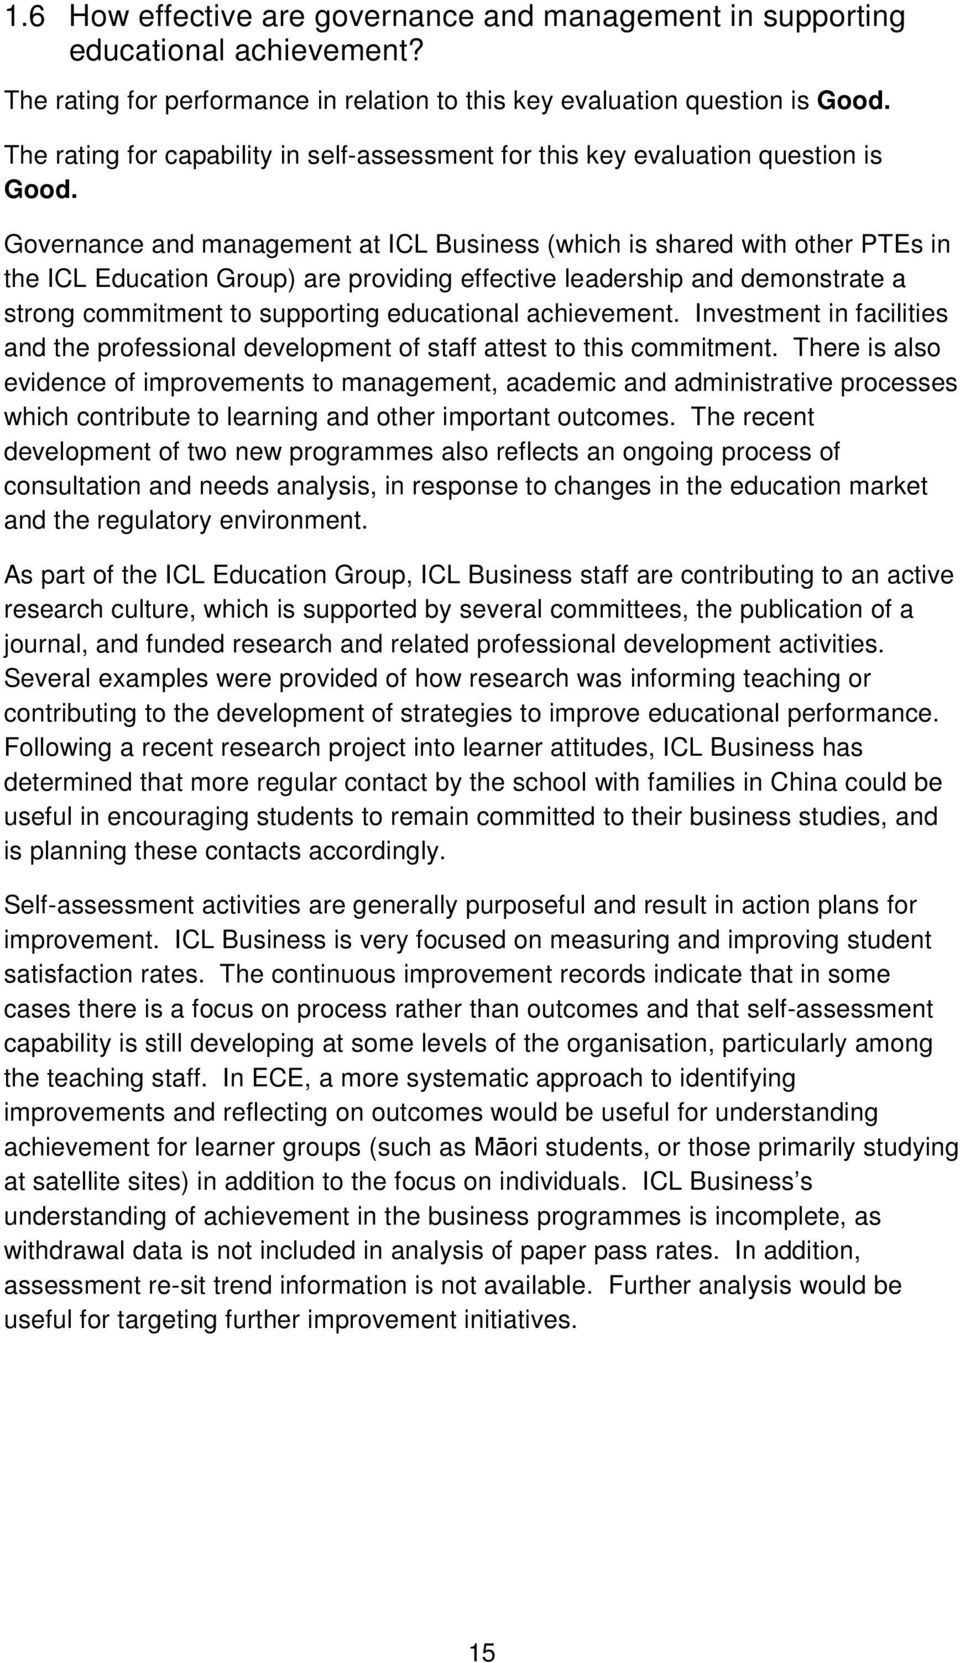 Governance and management at ICL Business (which is shared with other PTEs in the ICL Education Group) are providing effective leadership and demonstrate a strong commitment to supporting educational